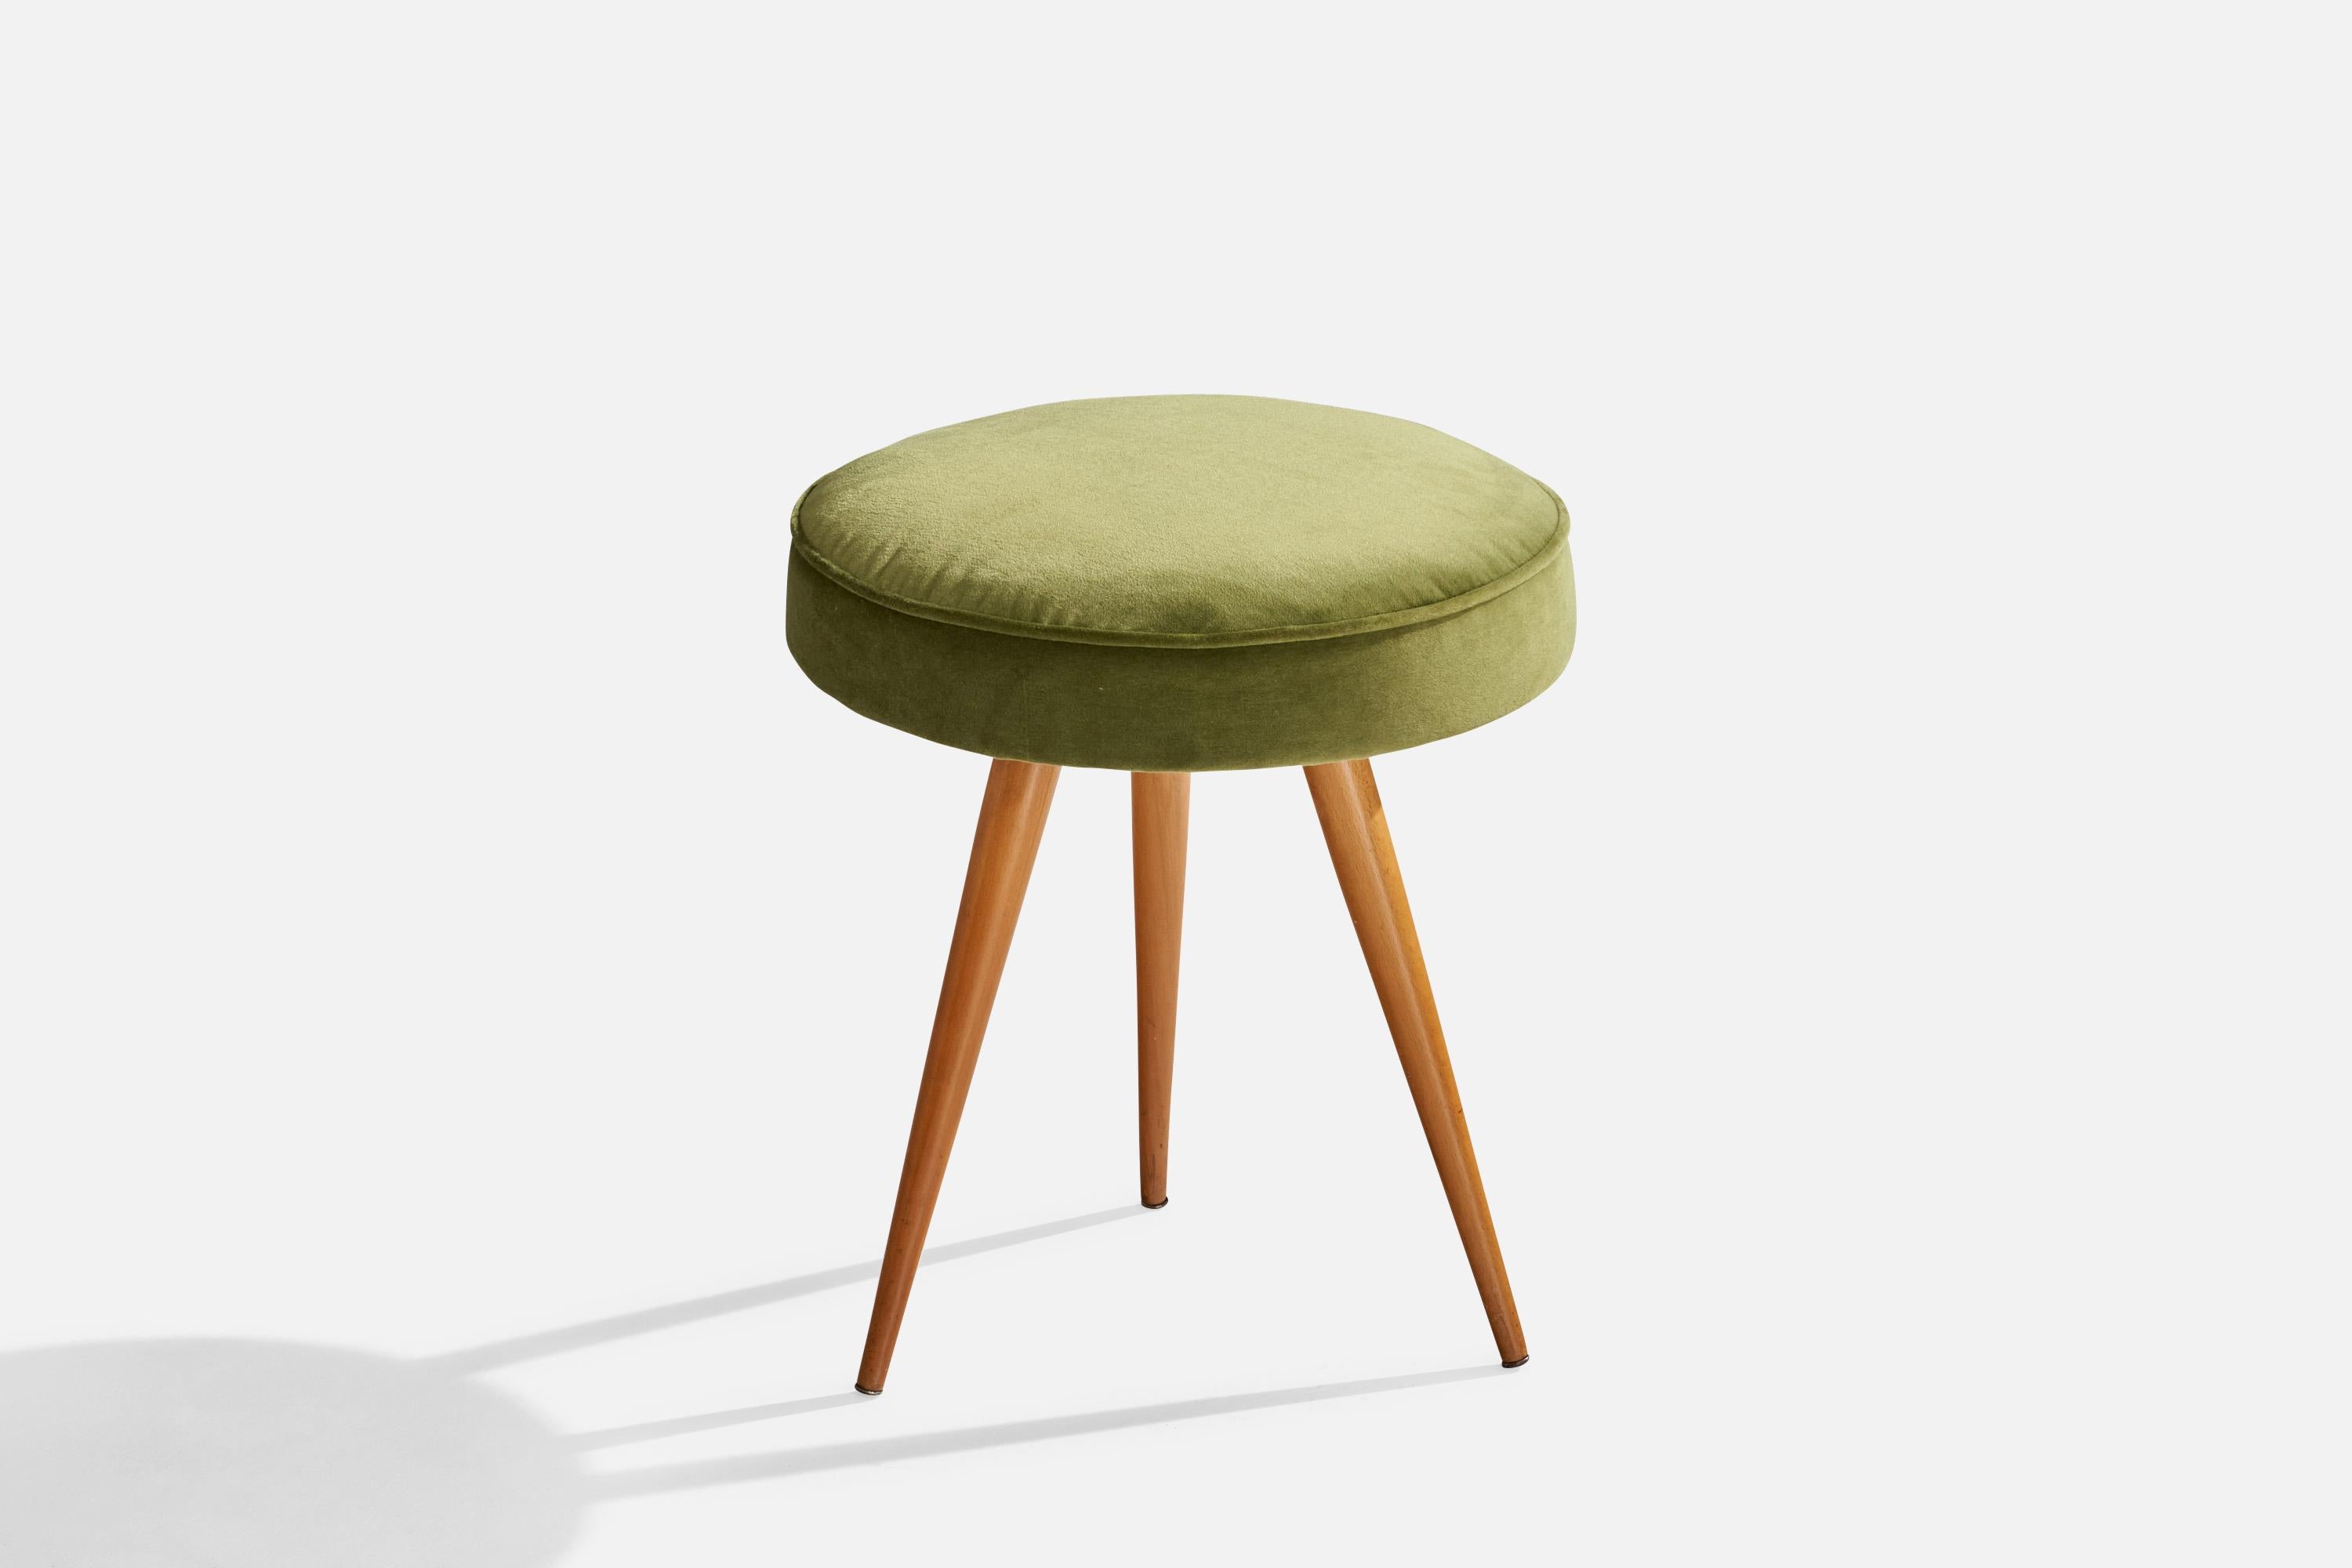 A wood and green velvet stool produced by Felix Diller, Germany, 1950s.

Seat height: 17.25”